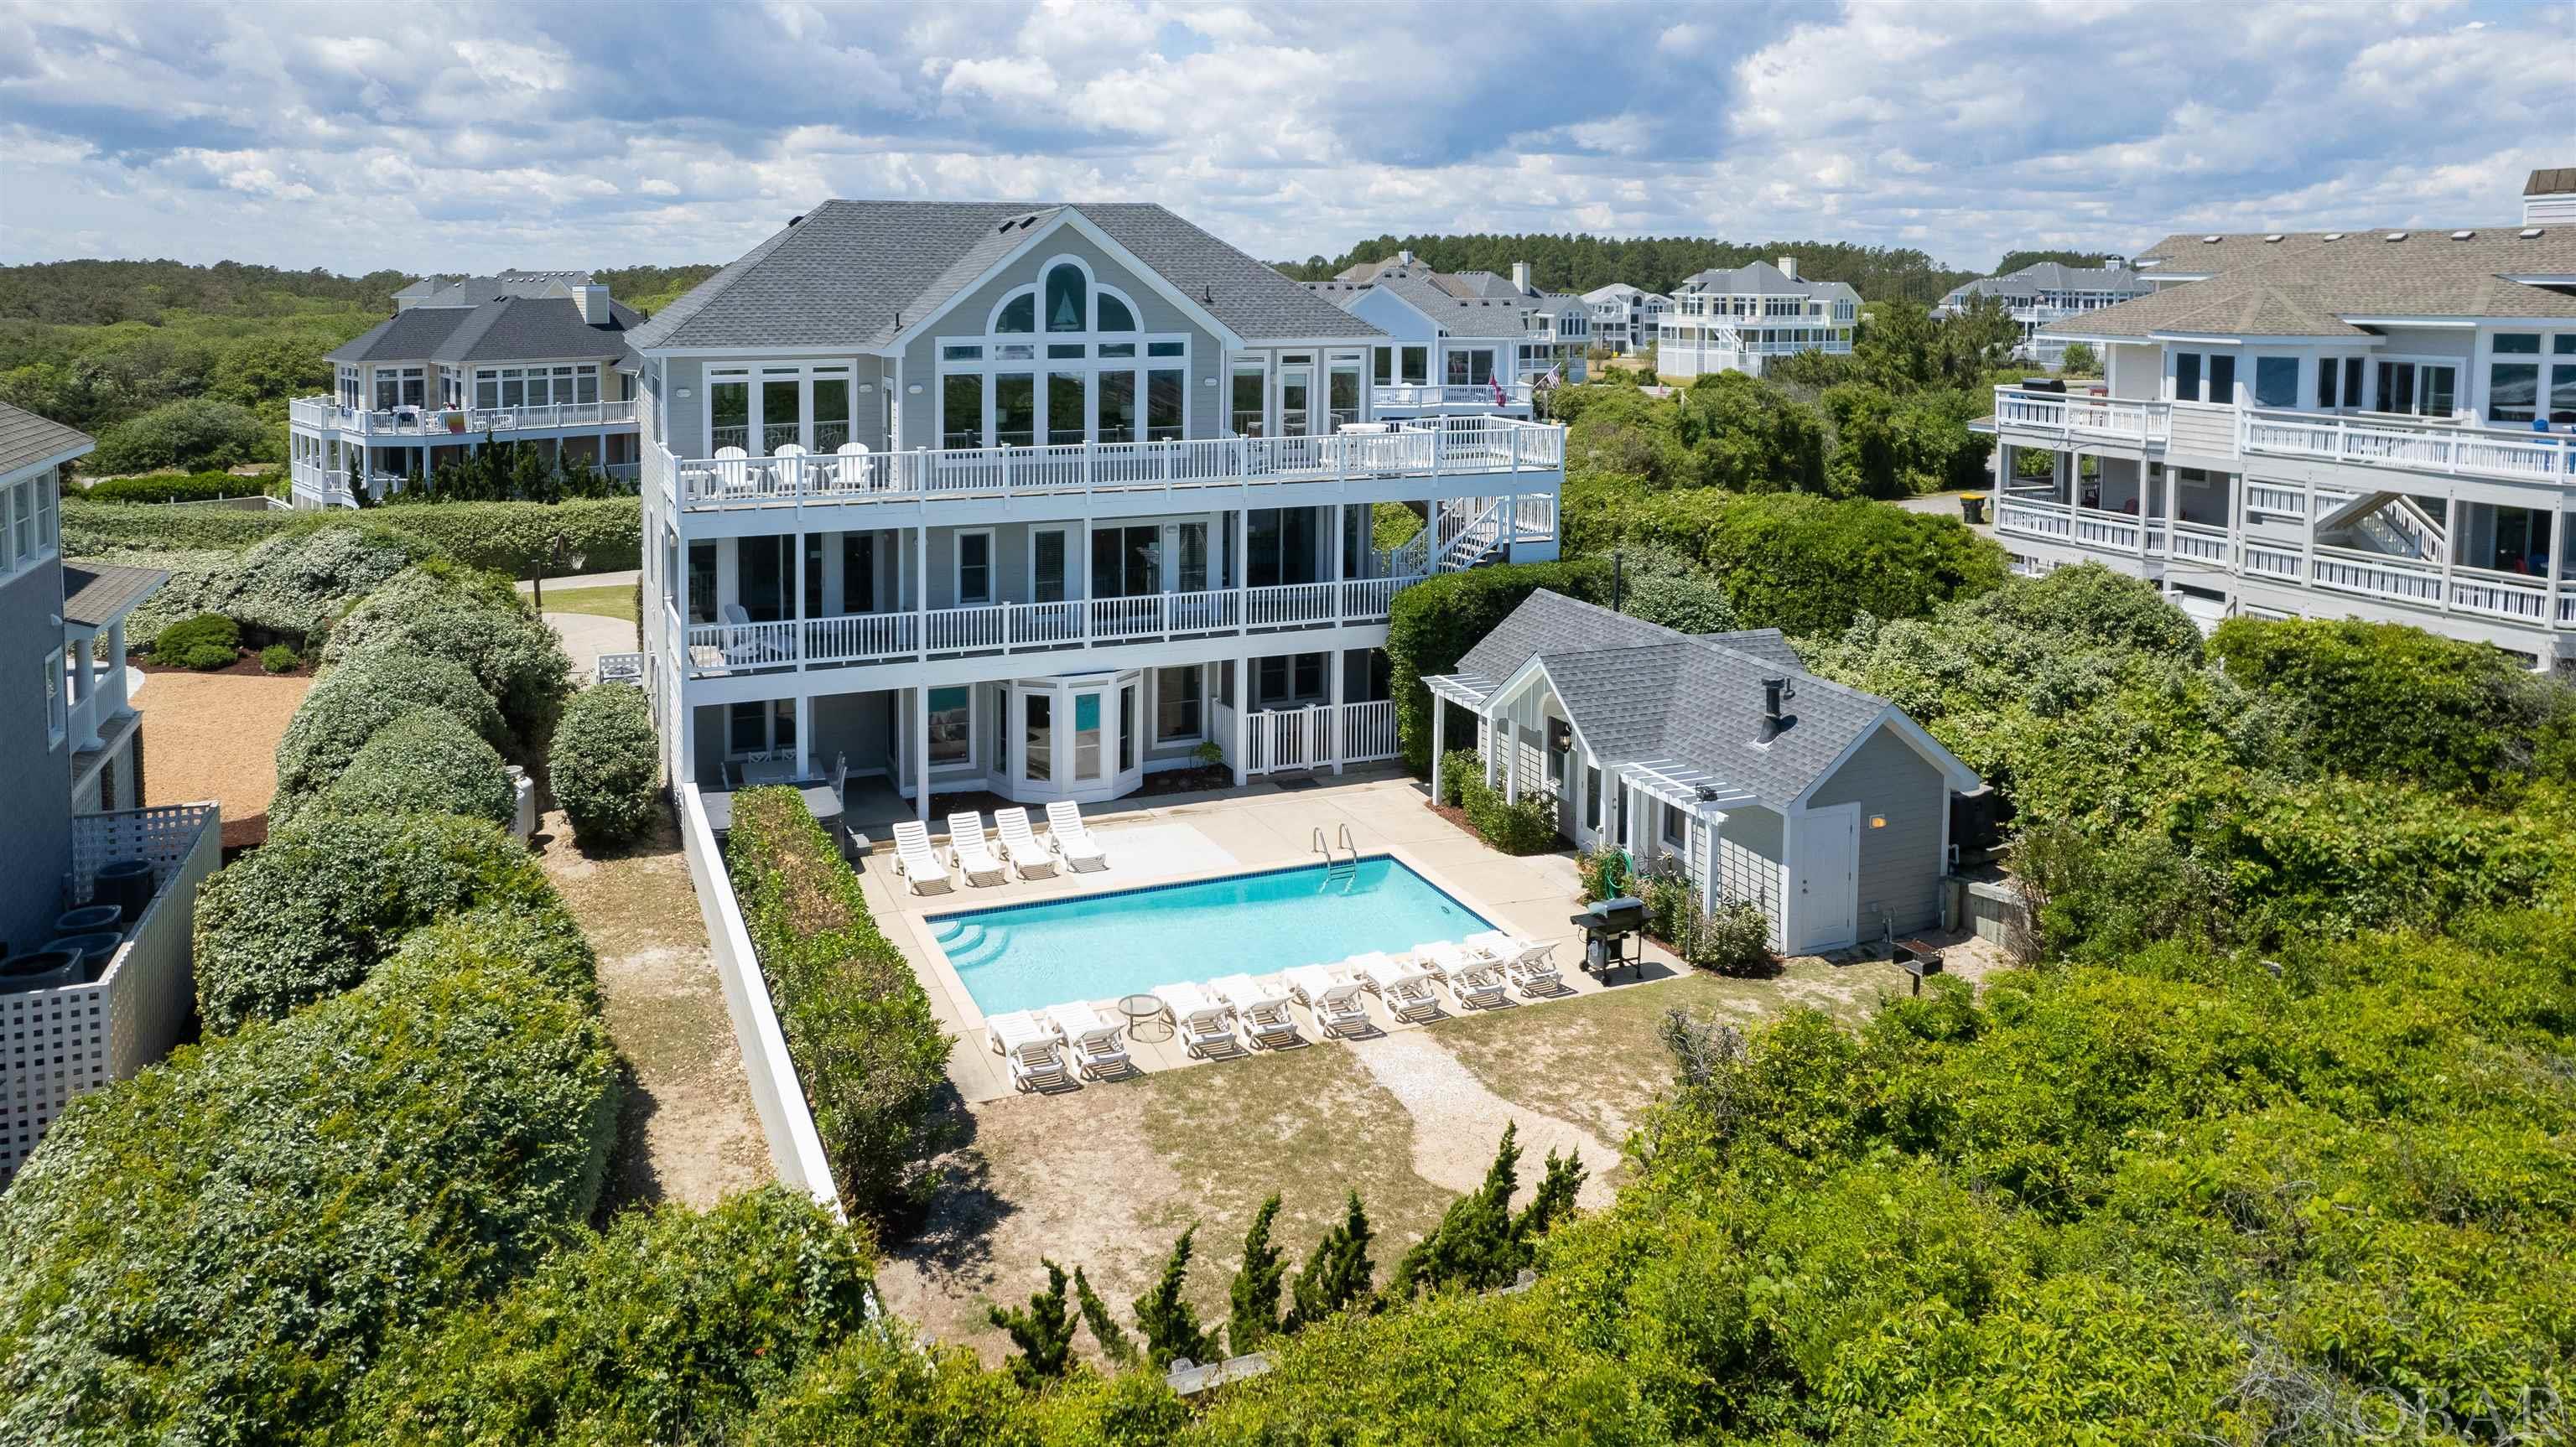 411 Great Gap Point, Corolla, NC 27927, 9 Bedrooms Bedrooms, ,9 BathroomsBathrooms,Residential,For sale,Great Gap Point,125191